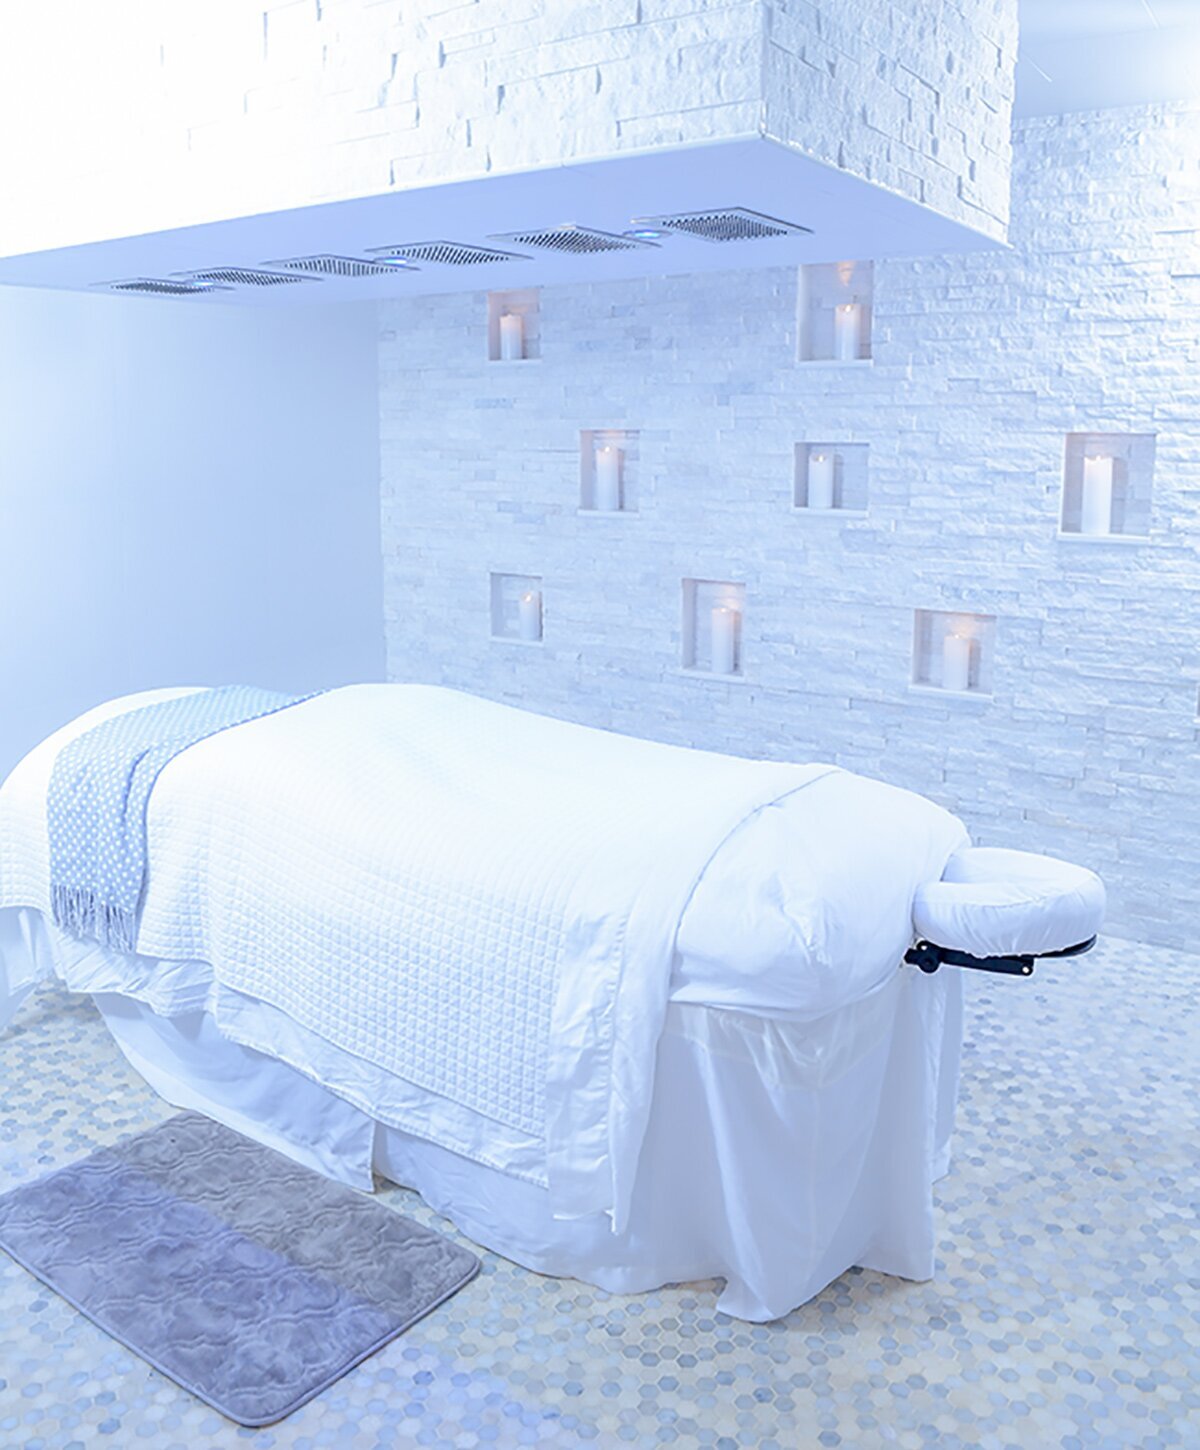 Vero Beach Hydrotherapy bed